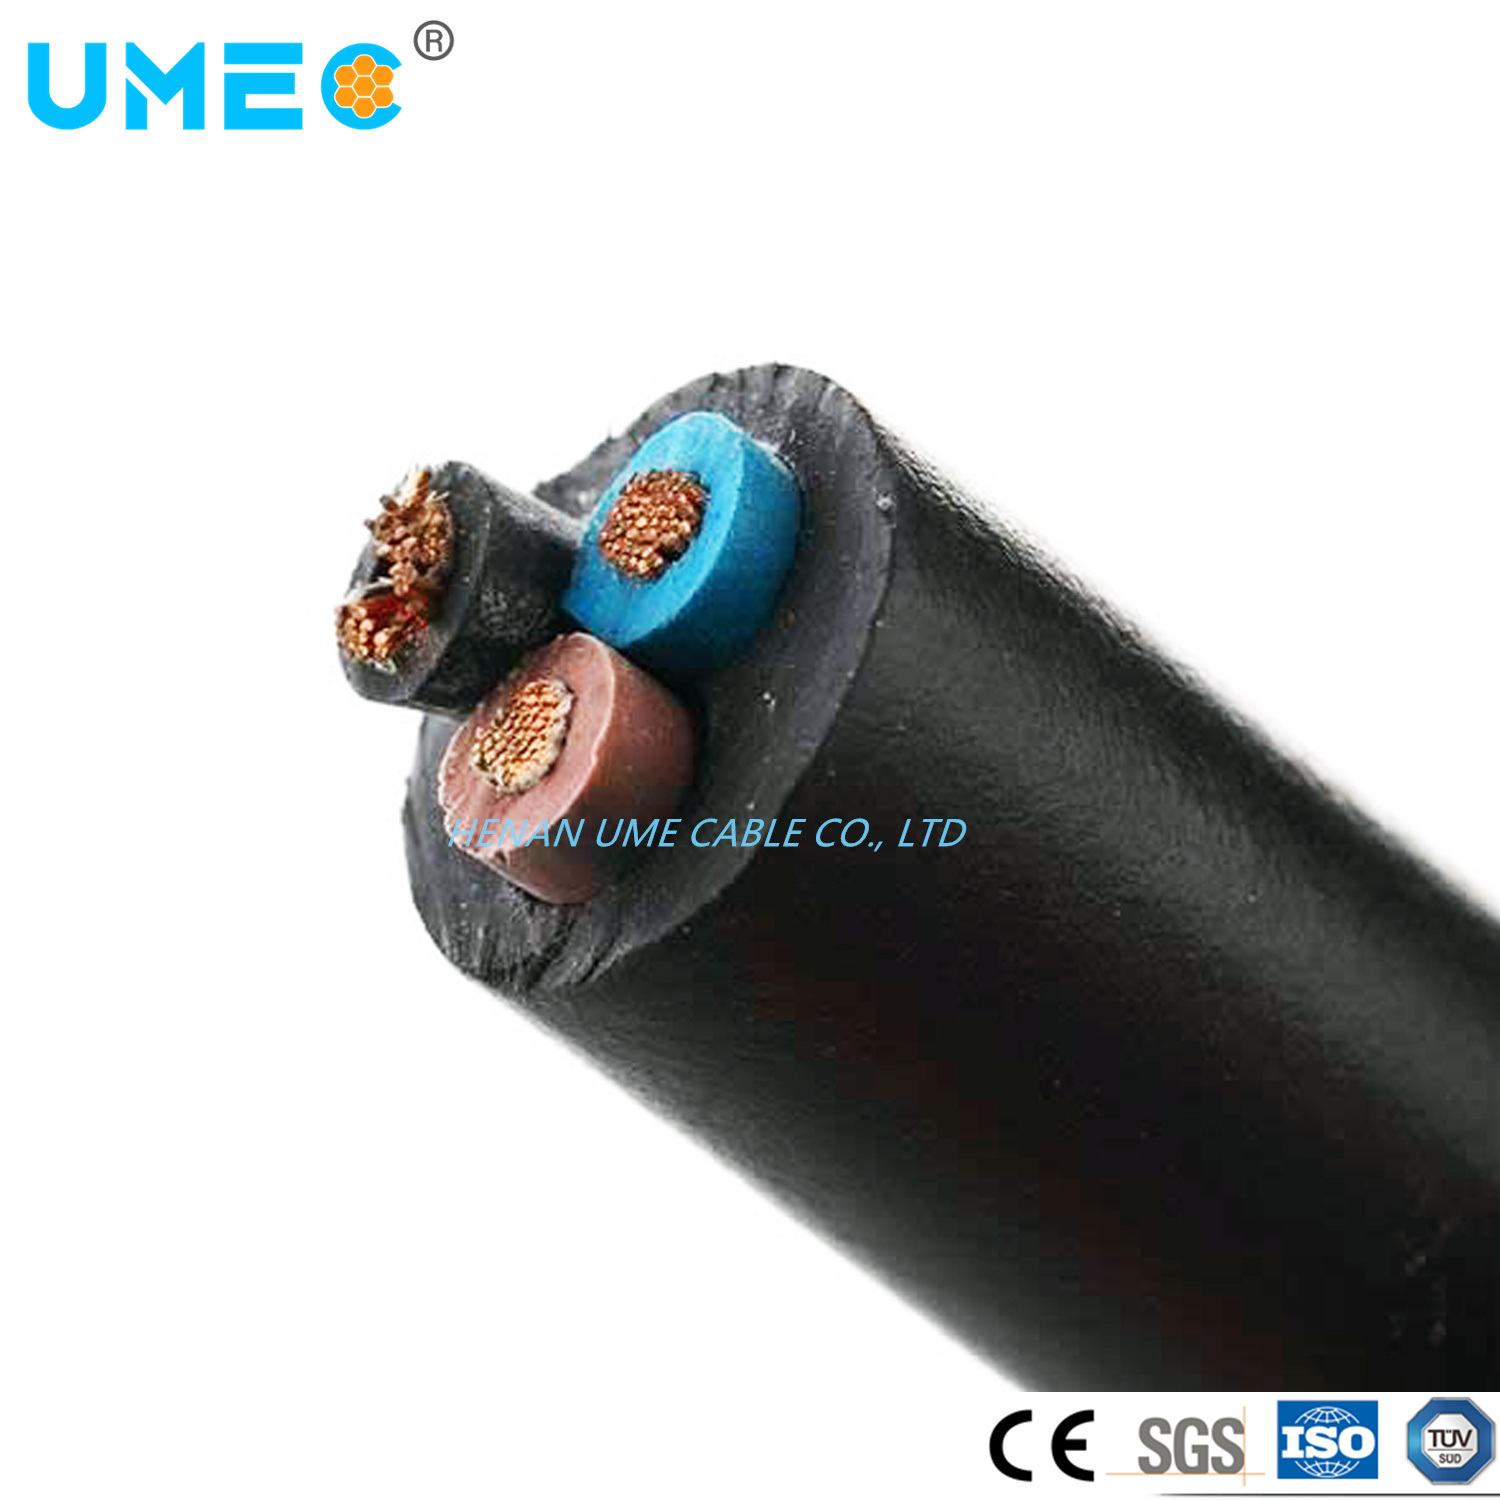 
                Flame Retardant Class 5 Flexible Indoor Use Rubber Cable Extruded H05rr-F H05rn-F 25mm2 35mm2 Price
            